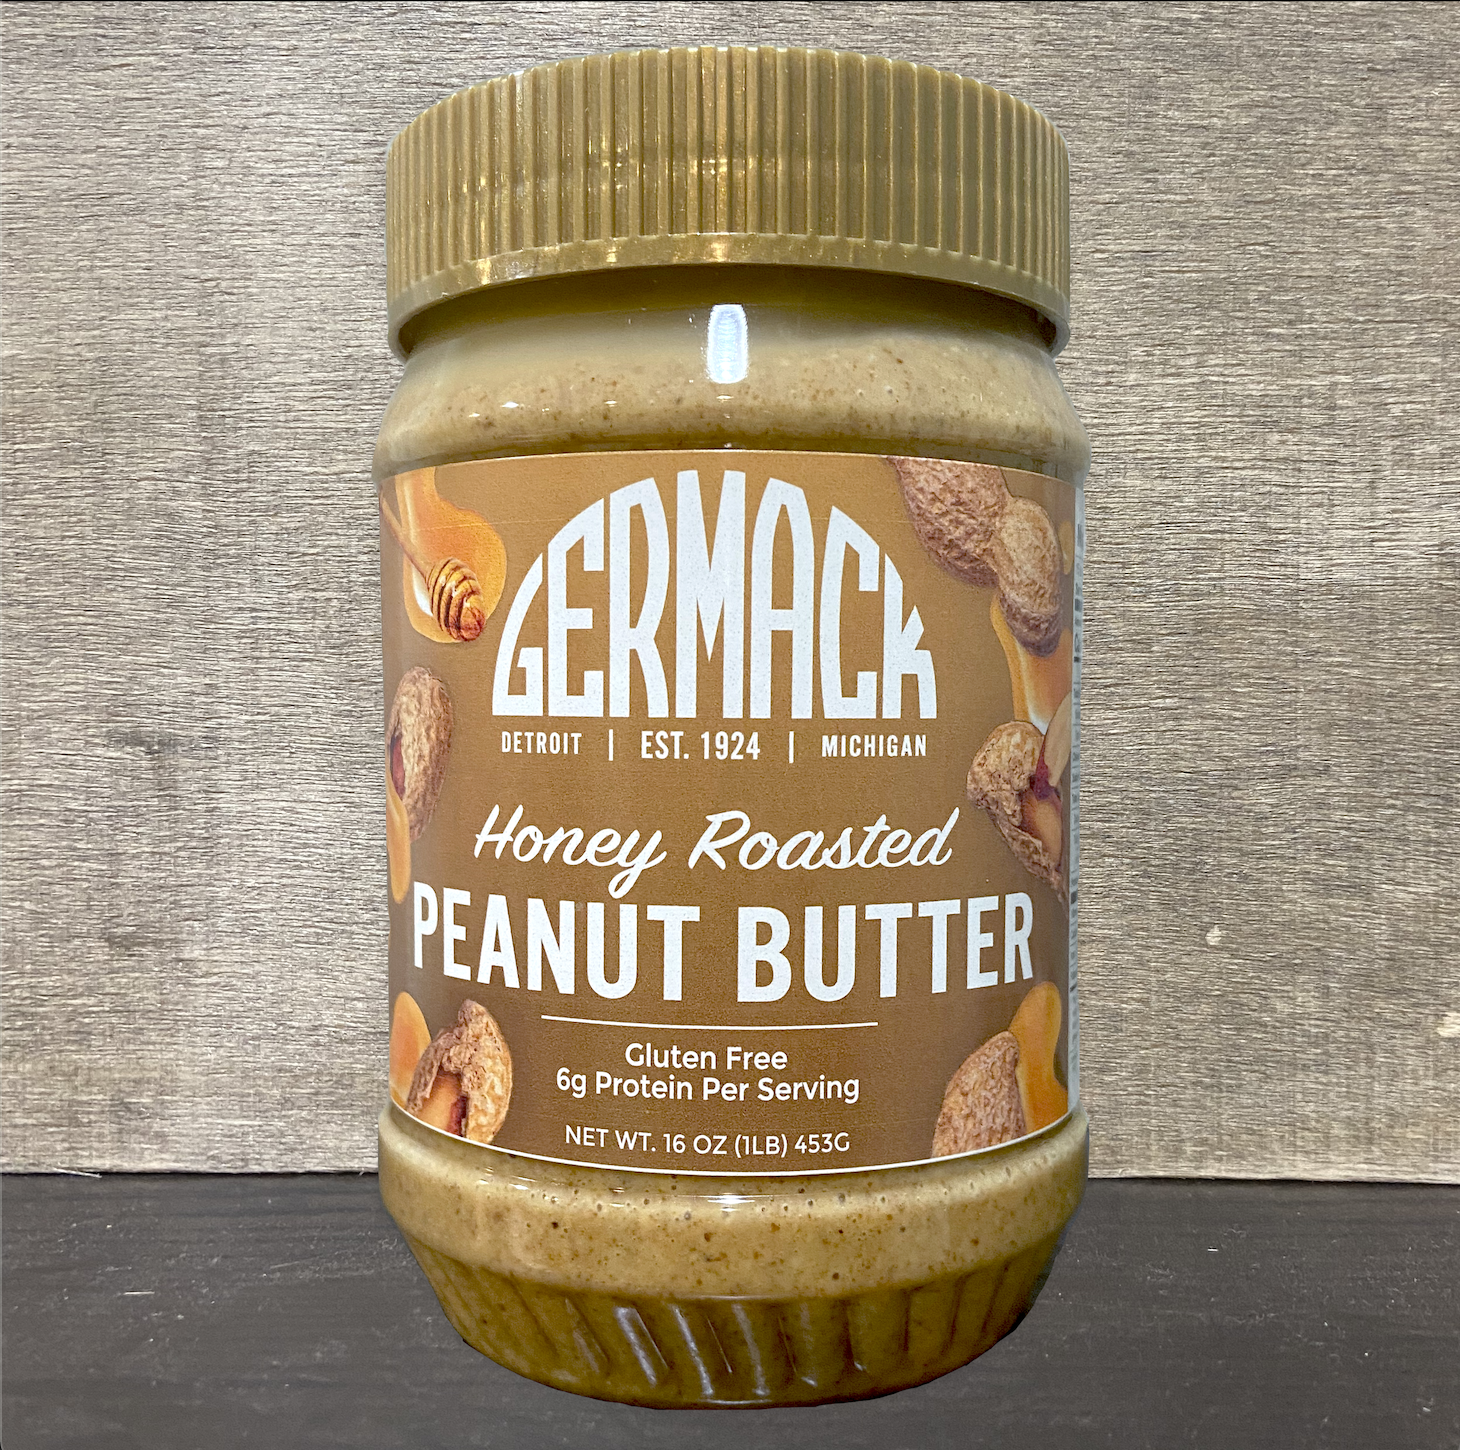 Picture Nut Butters - Peanut Butter - Honey Roasted (16 oz. jar) 